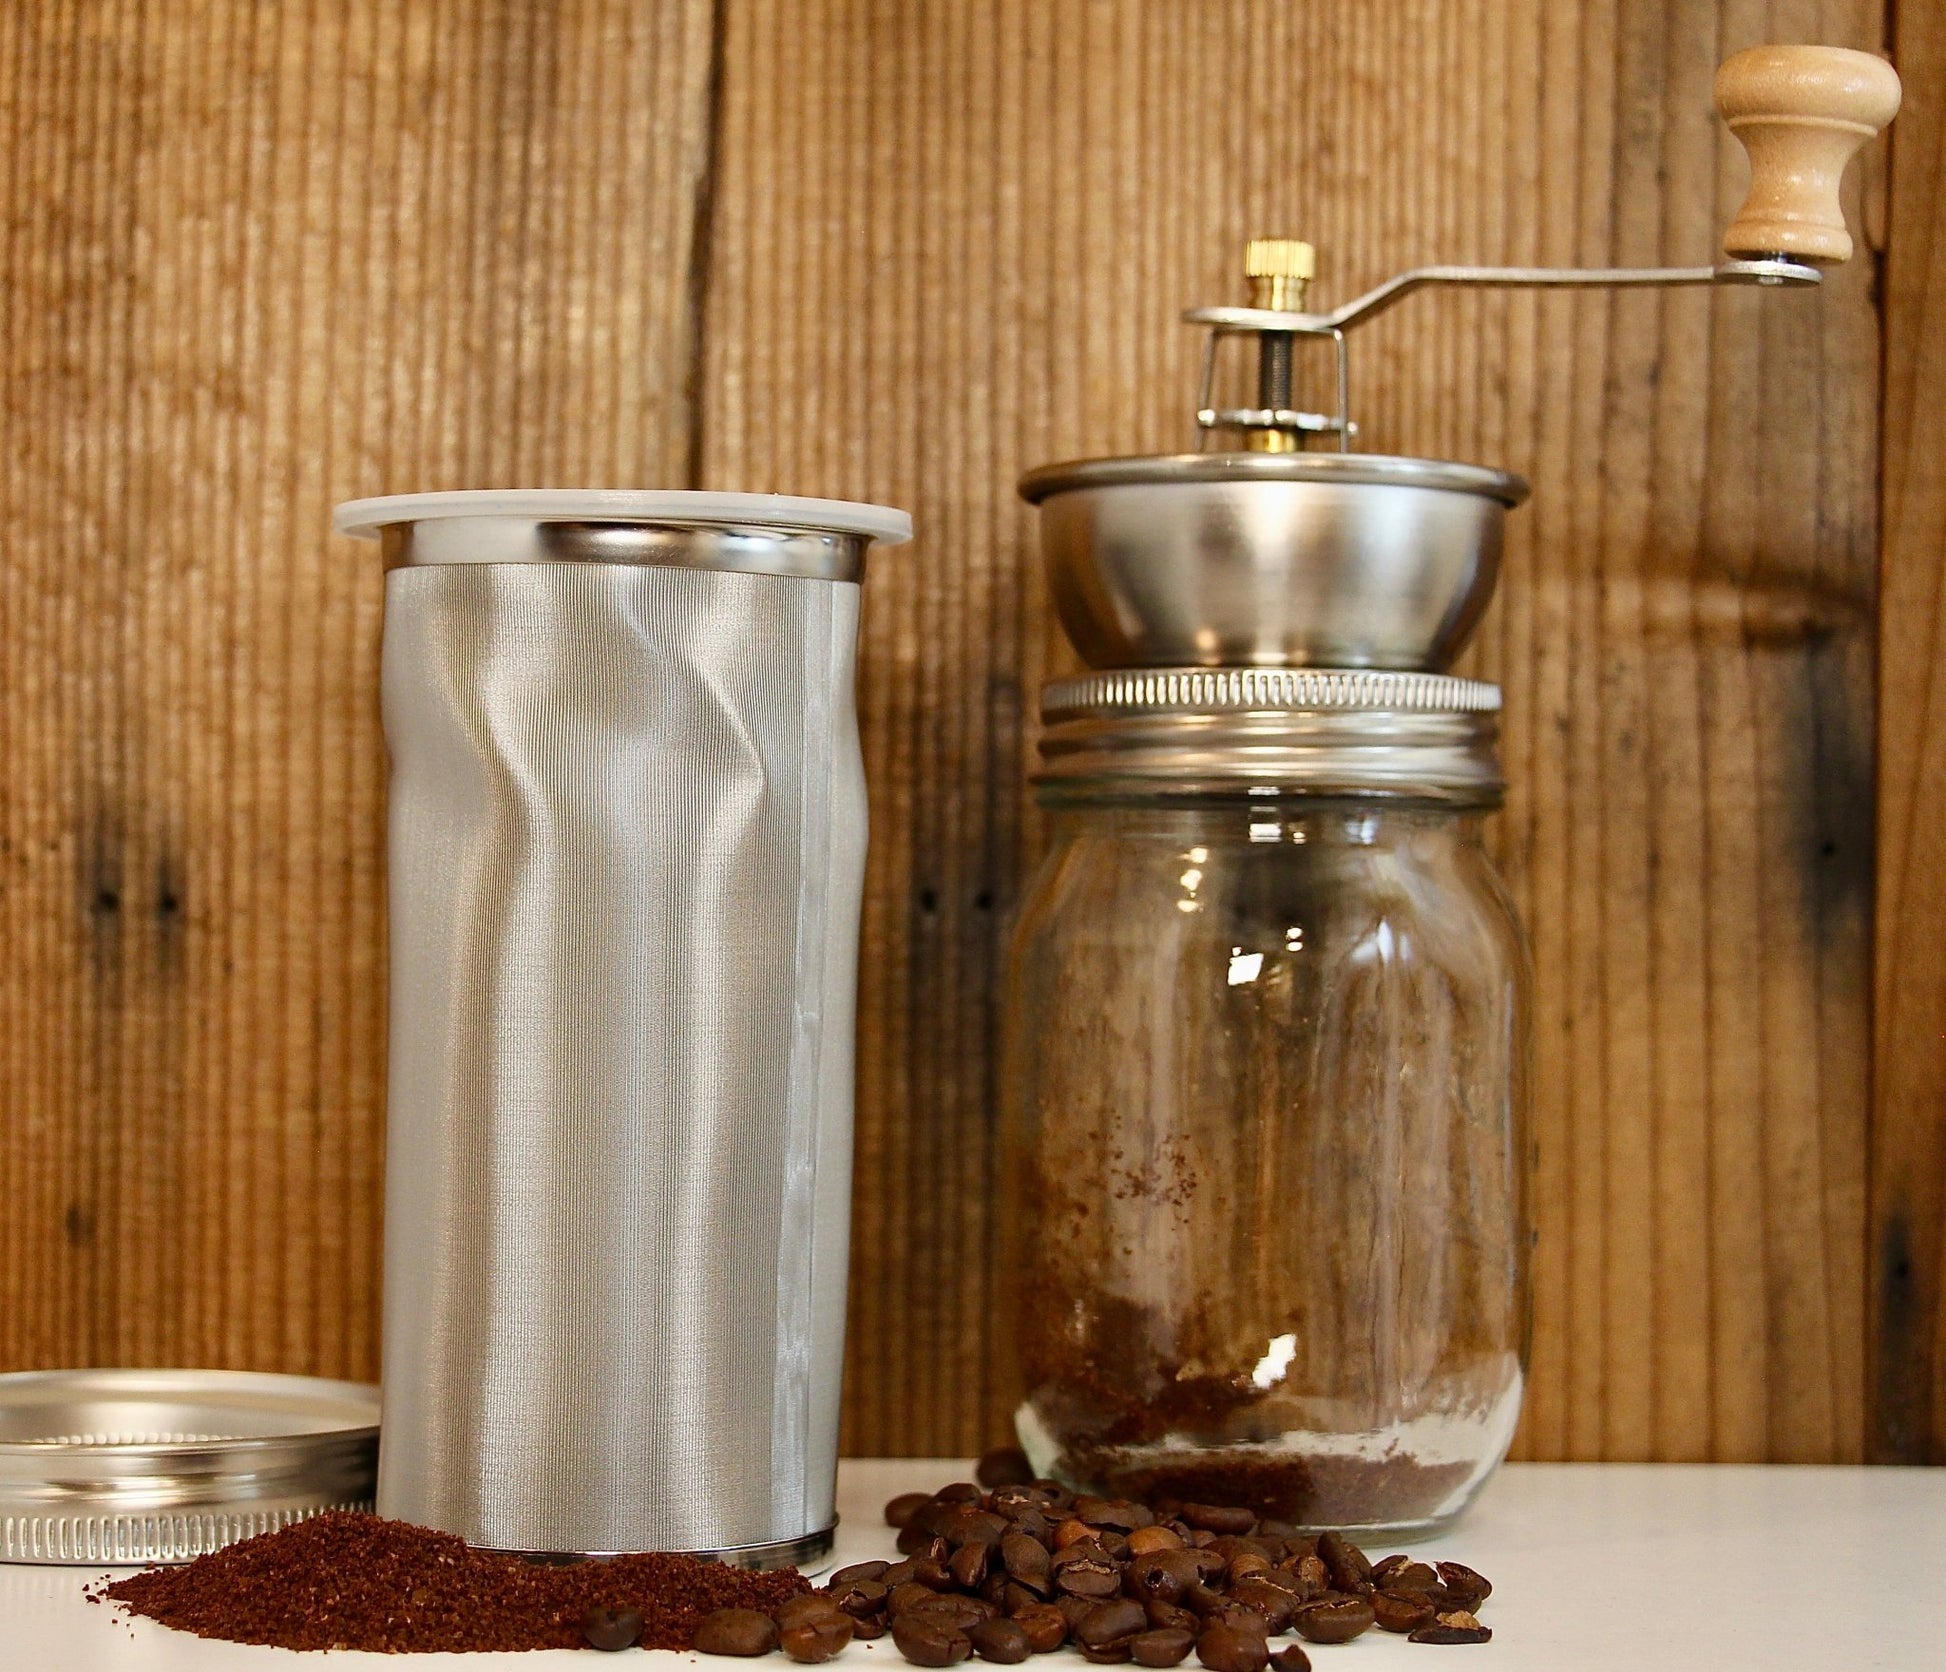 Coffee, Pepper, and Spice Grinder Lid for Jars